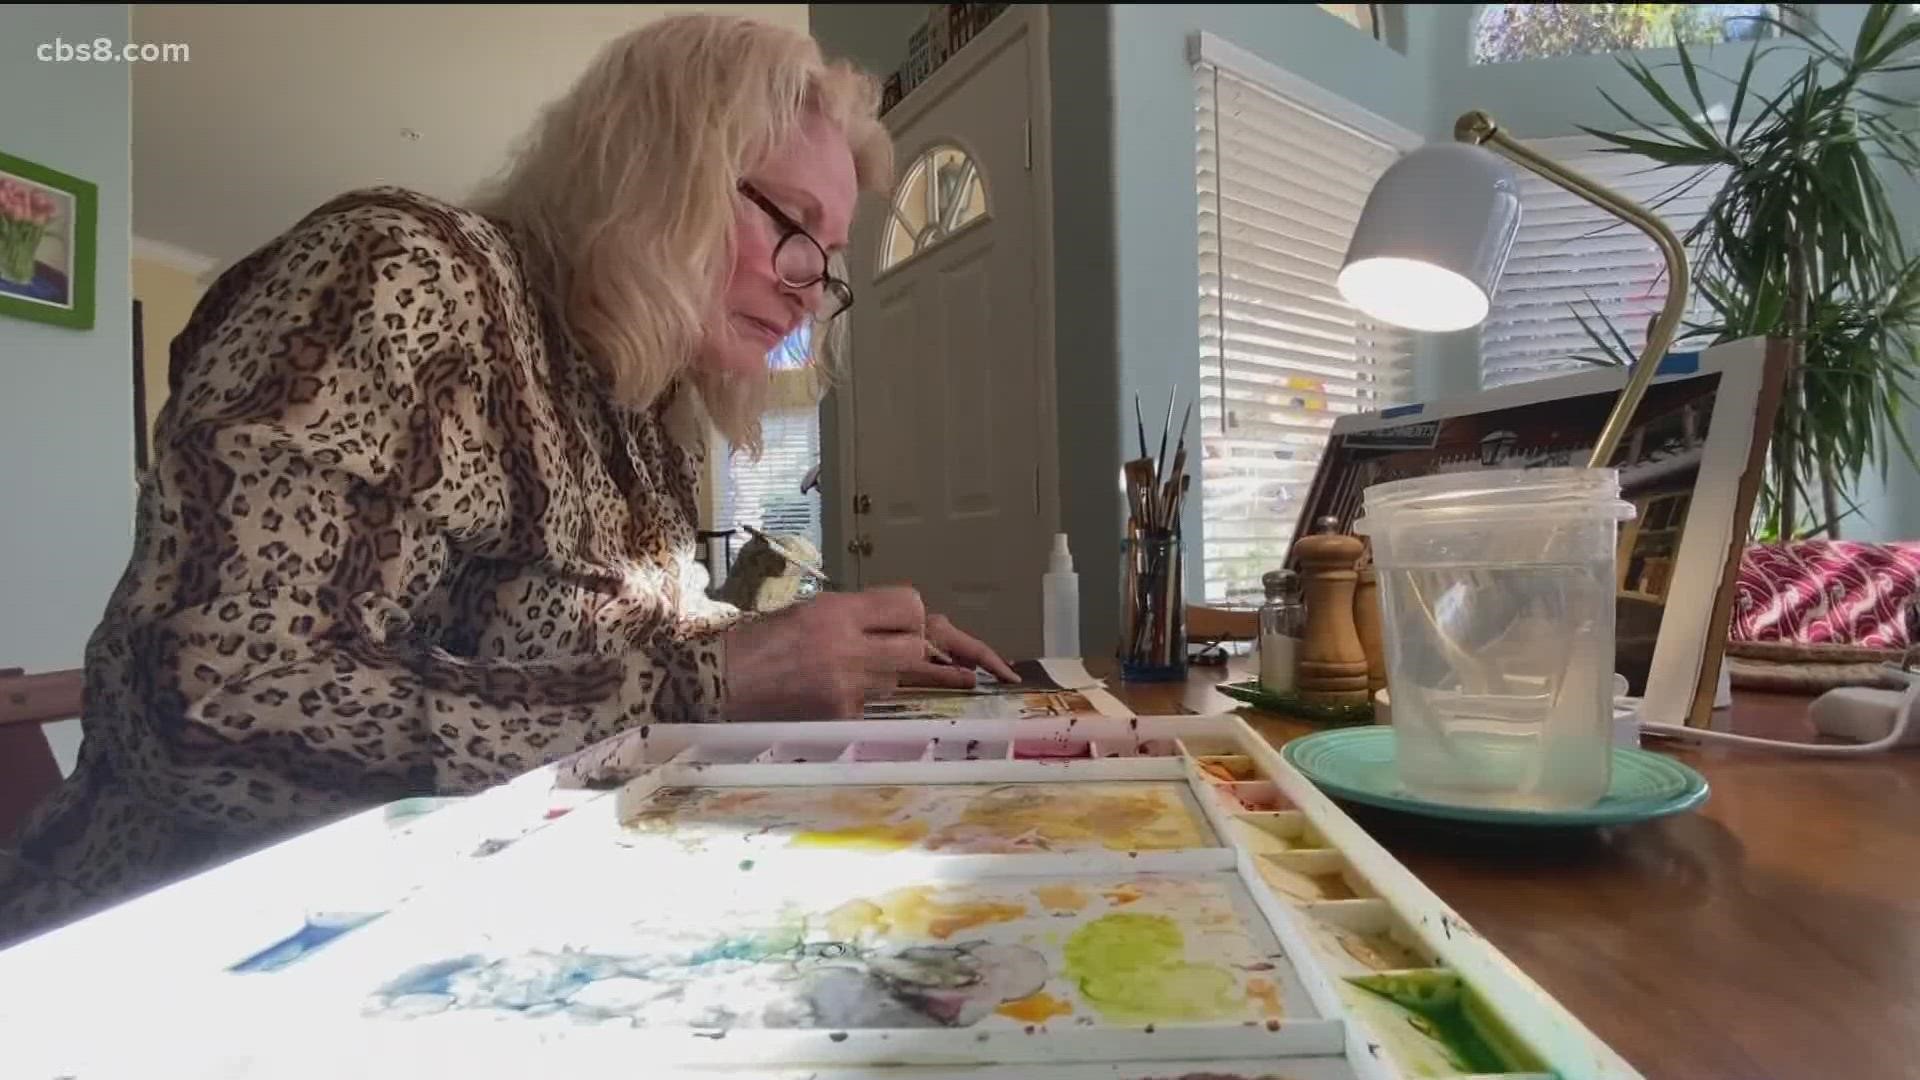 70-year-old artist launches new career and turns her first painting into a profit.